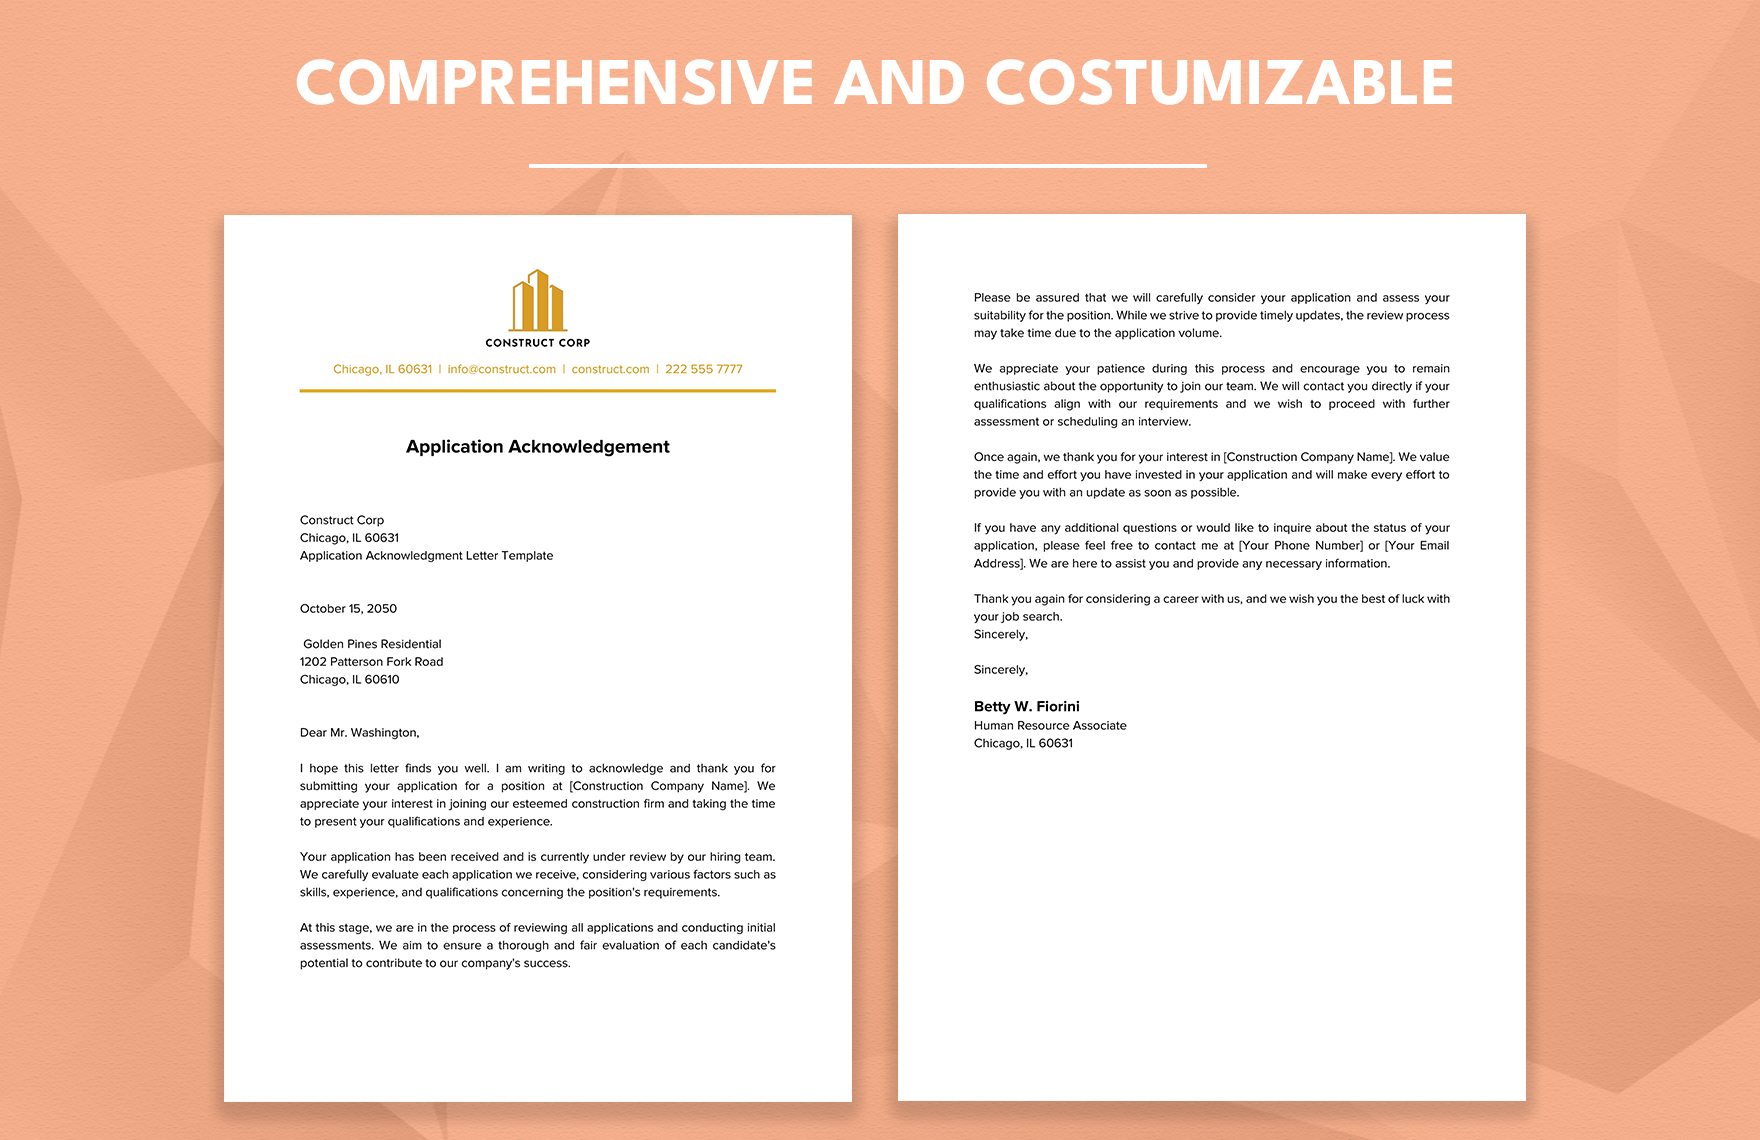 Application Acknowledgment Letter Template